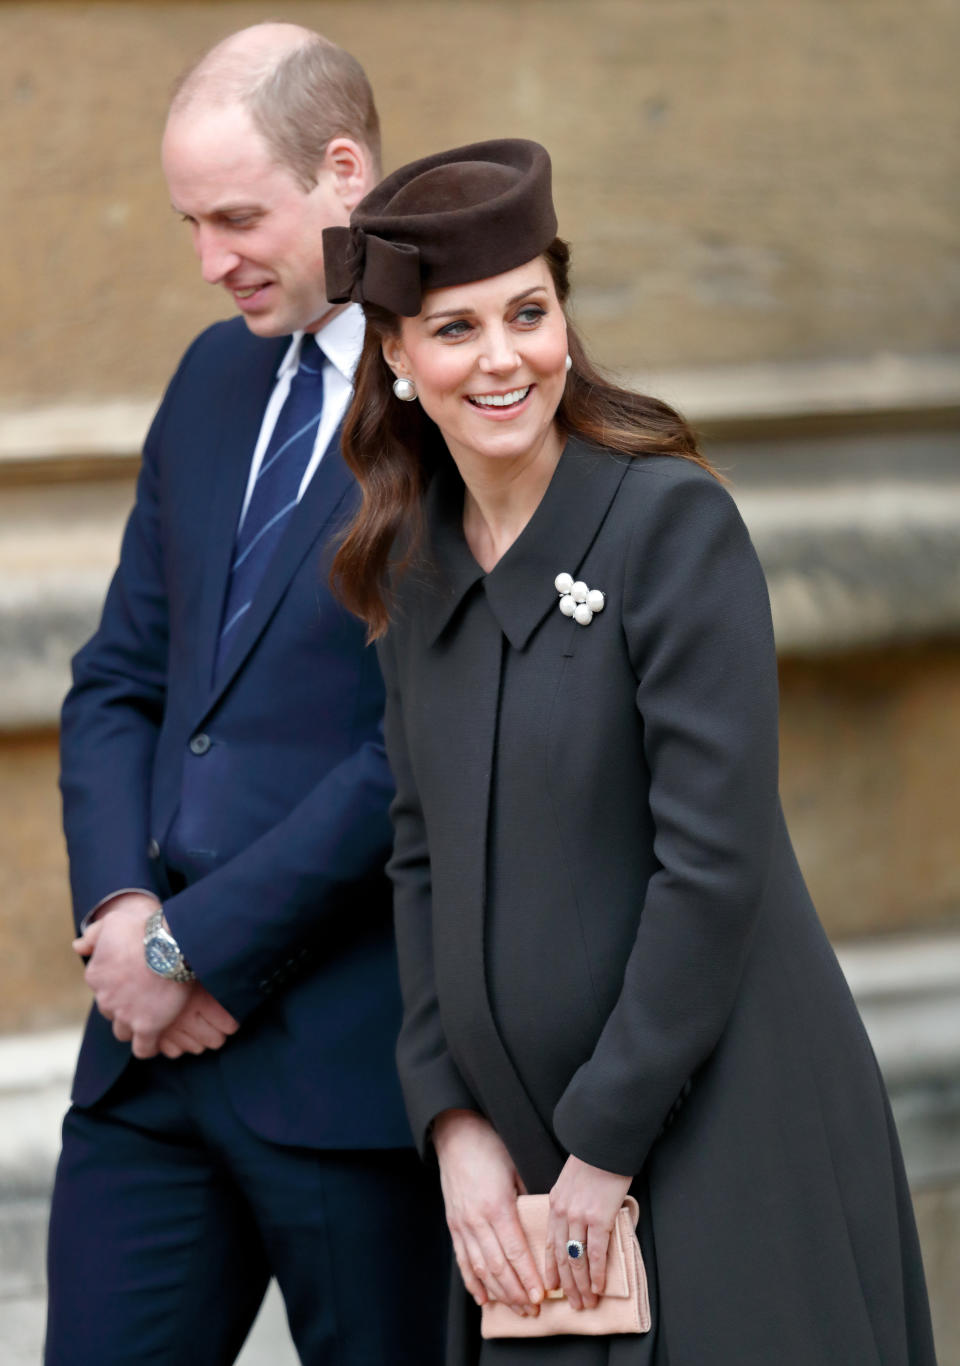 WINDSOR, UNITED KINGDOM - APRIL 01: (EMBARGOED FOR PUBLICATION IN UK NEWSPAPERS UNTIL 24 HOURS AFTER CREATE DATE AND TIME) Prince William, Duke of Cambridge and Catherine, Duchess of Cambridge attend the traditional Easter Sunday church service at St George's Chapel, Windsor Castle on April 1, 2018 in Windsor, England. (Photo by Max Mumby/Indigo/Getty Images)